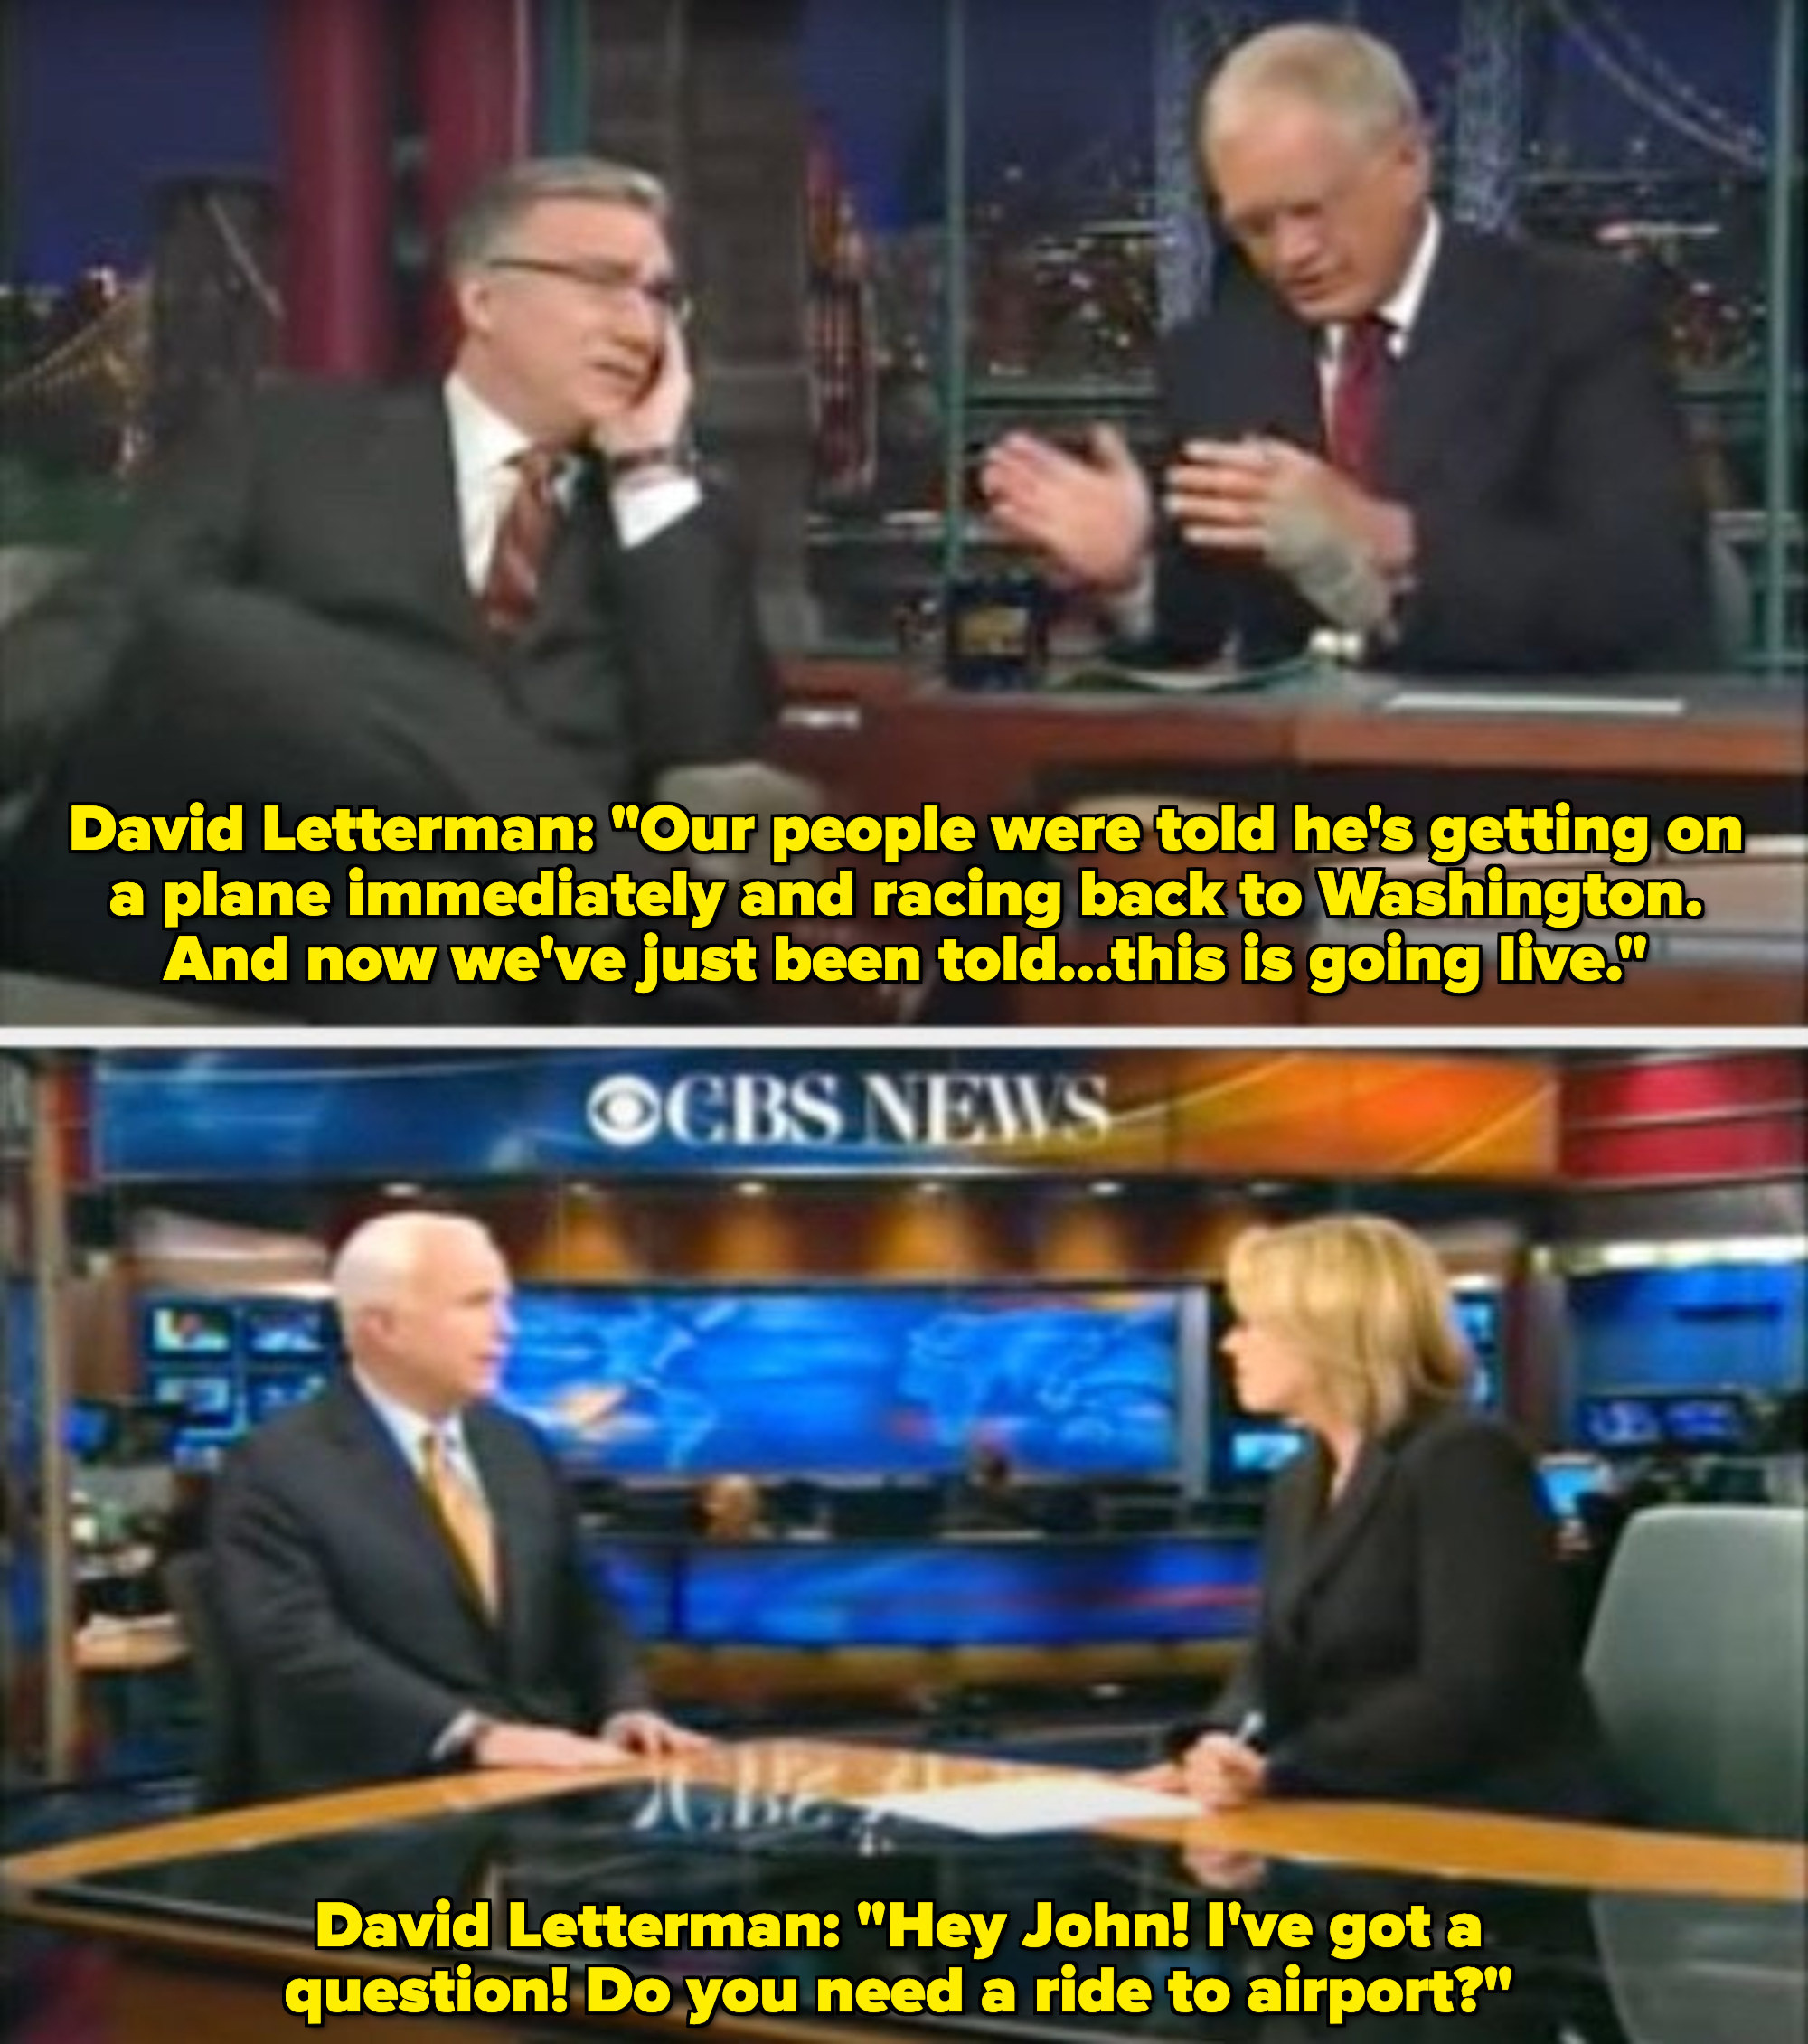 David Letterman discovers John McCain doing another interview on CBS